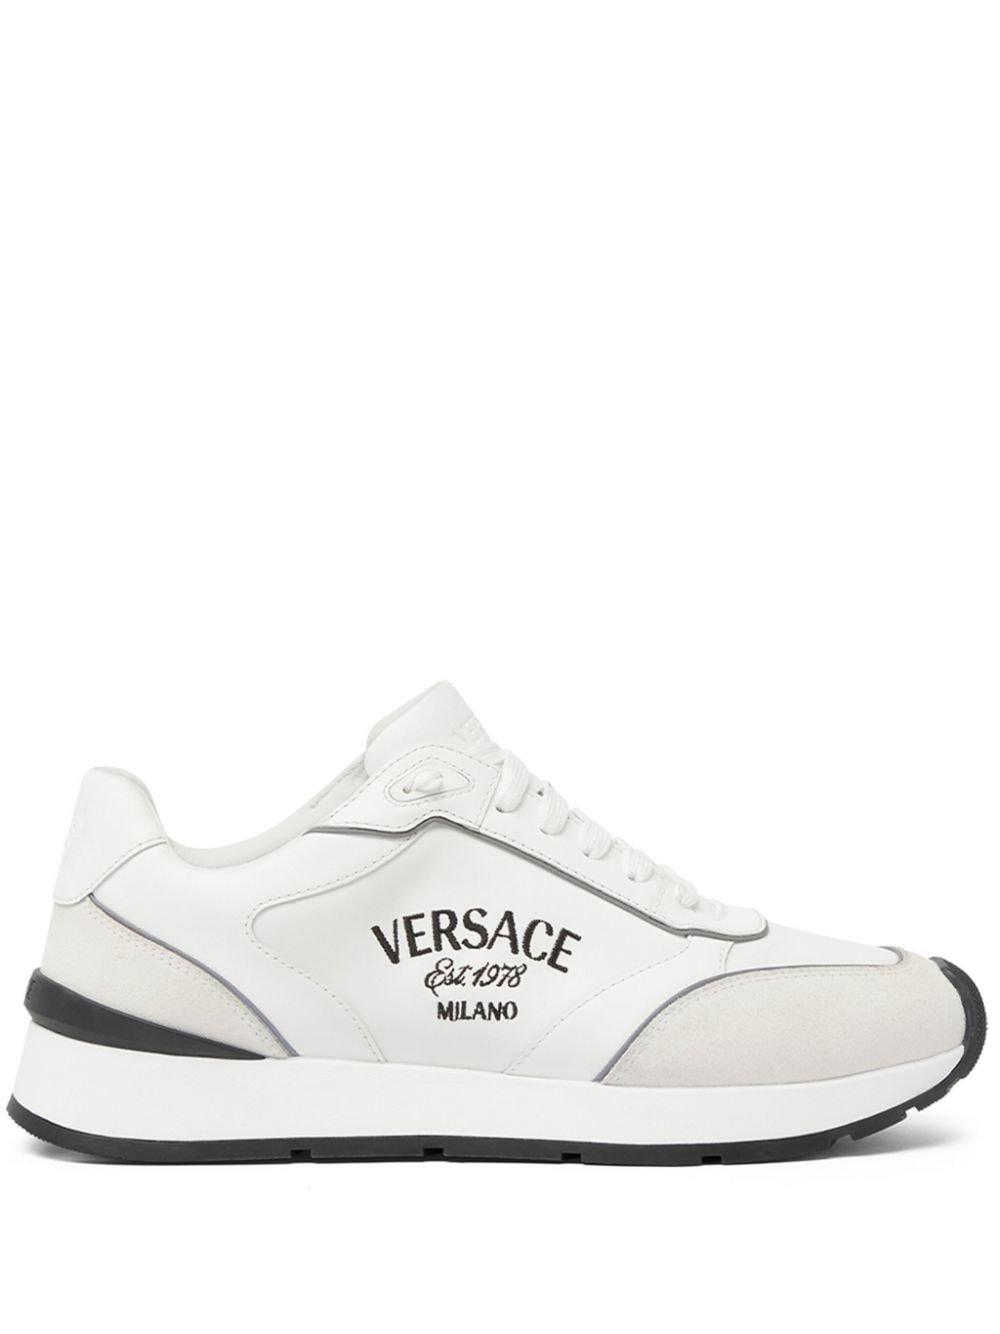 Versace Milano lace-up sneakers White